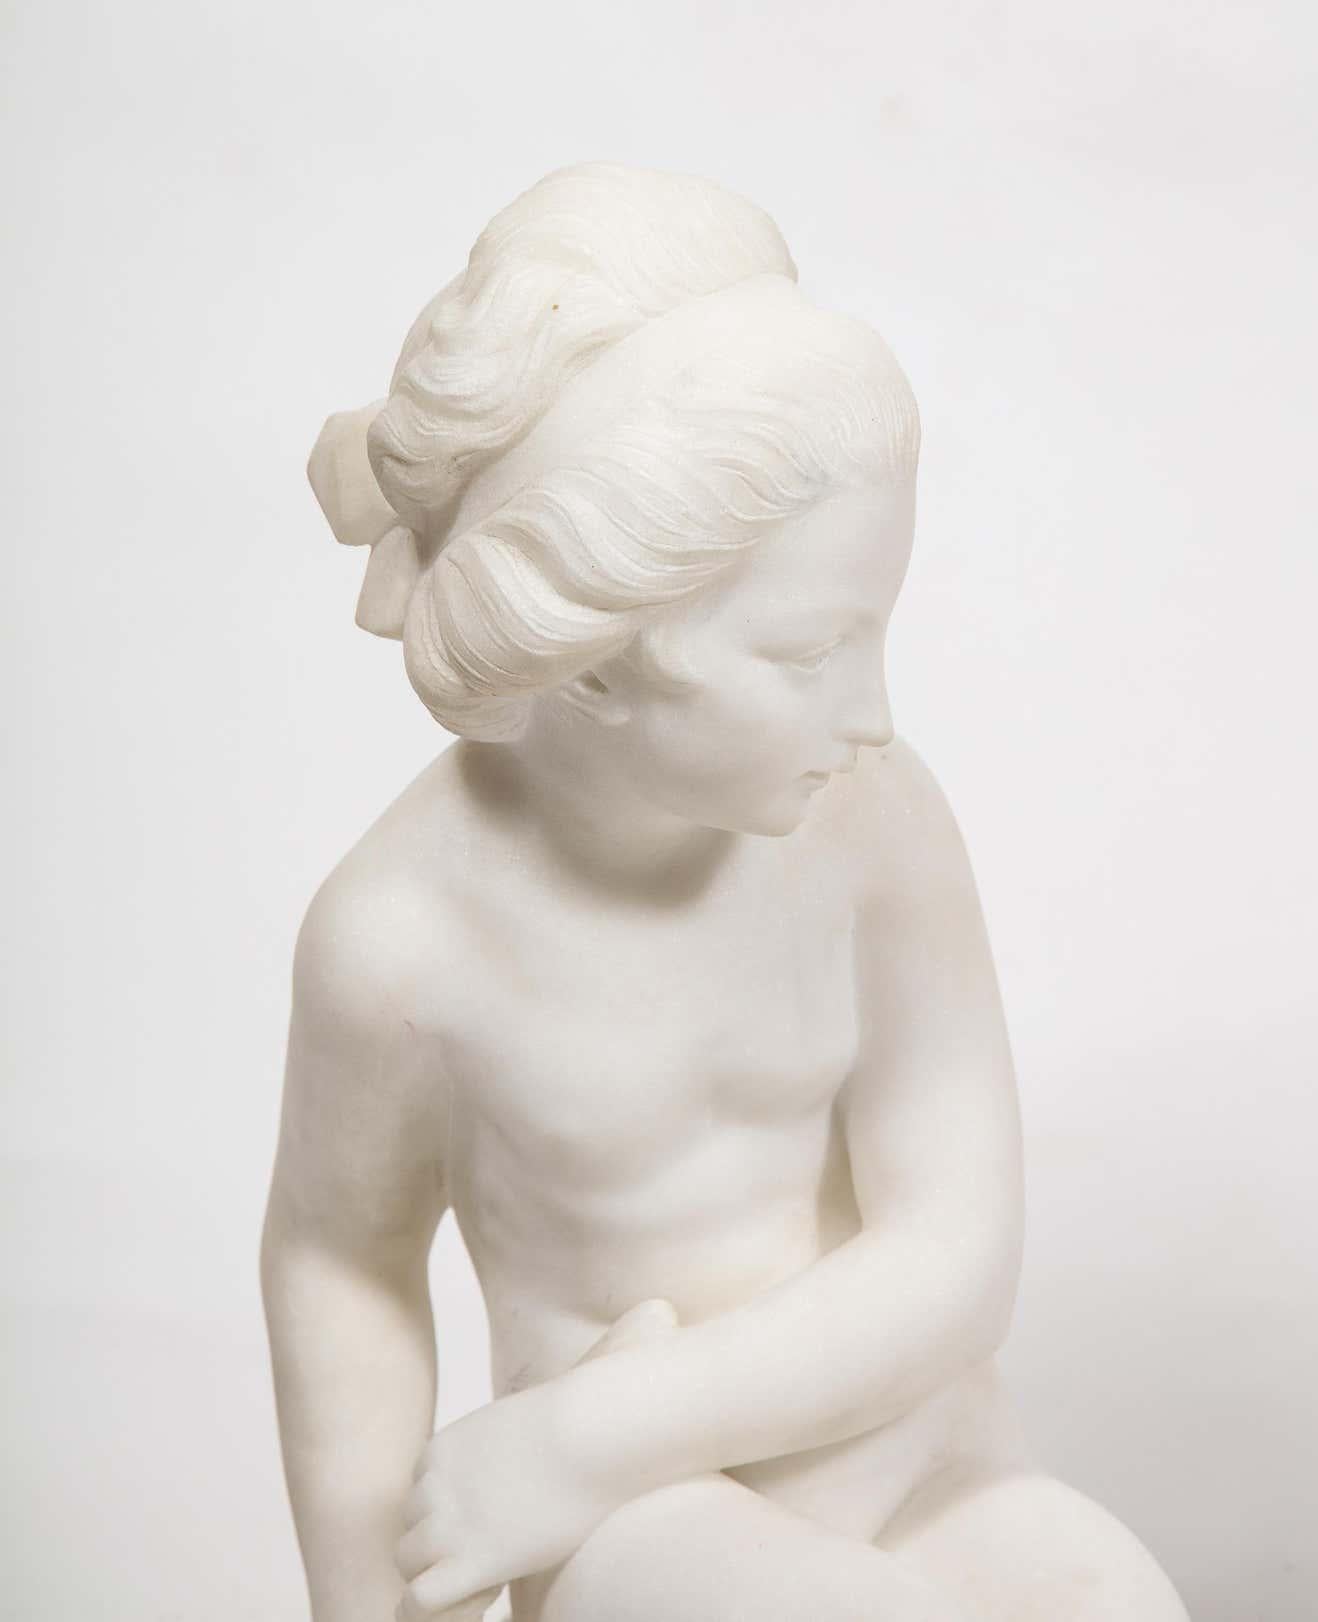 Charming Pair of Italian Carrara Marble Figures of Children, 19th Century - Gray Figurative Sculpture by Unknown